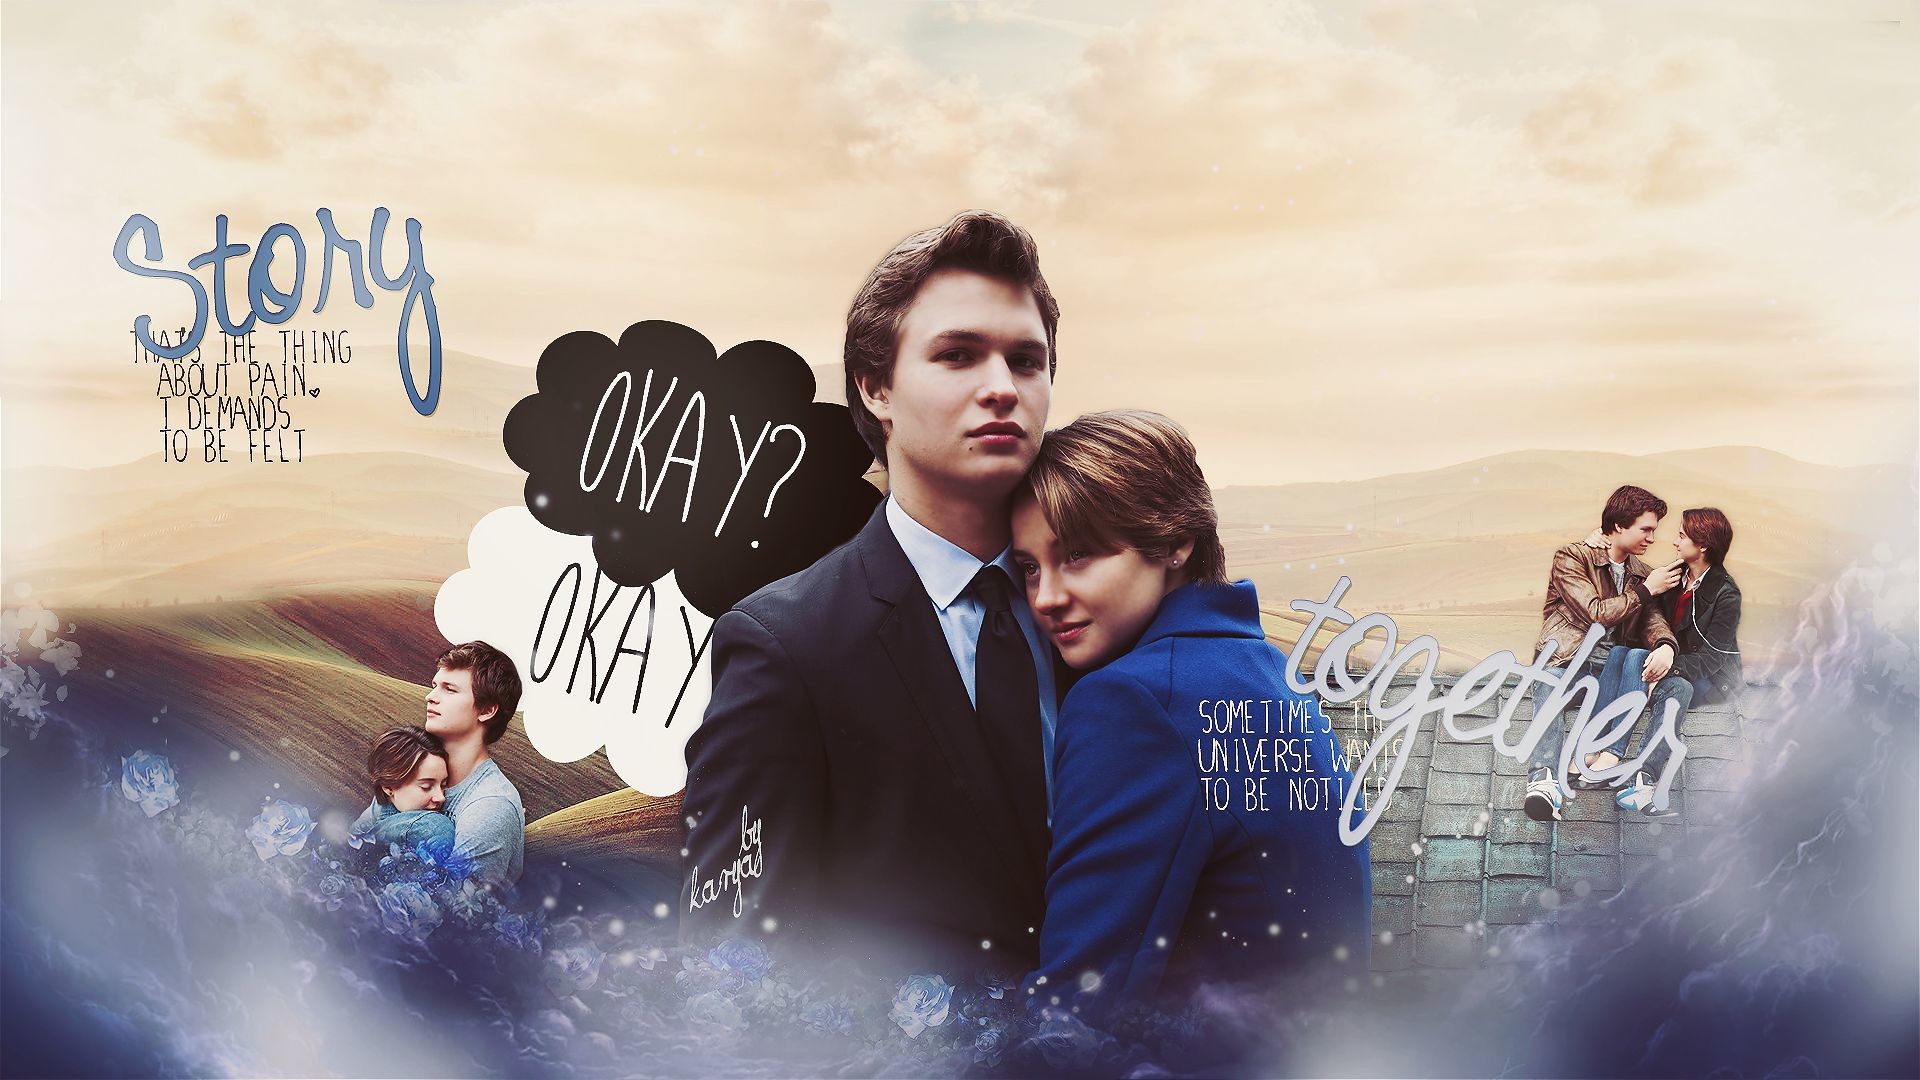 1920x1080 The Fault In Our Stars HD Background Picture Image